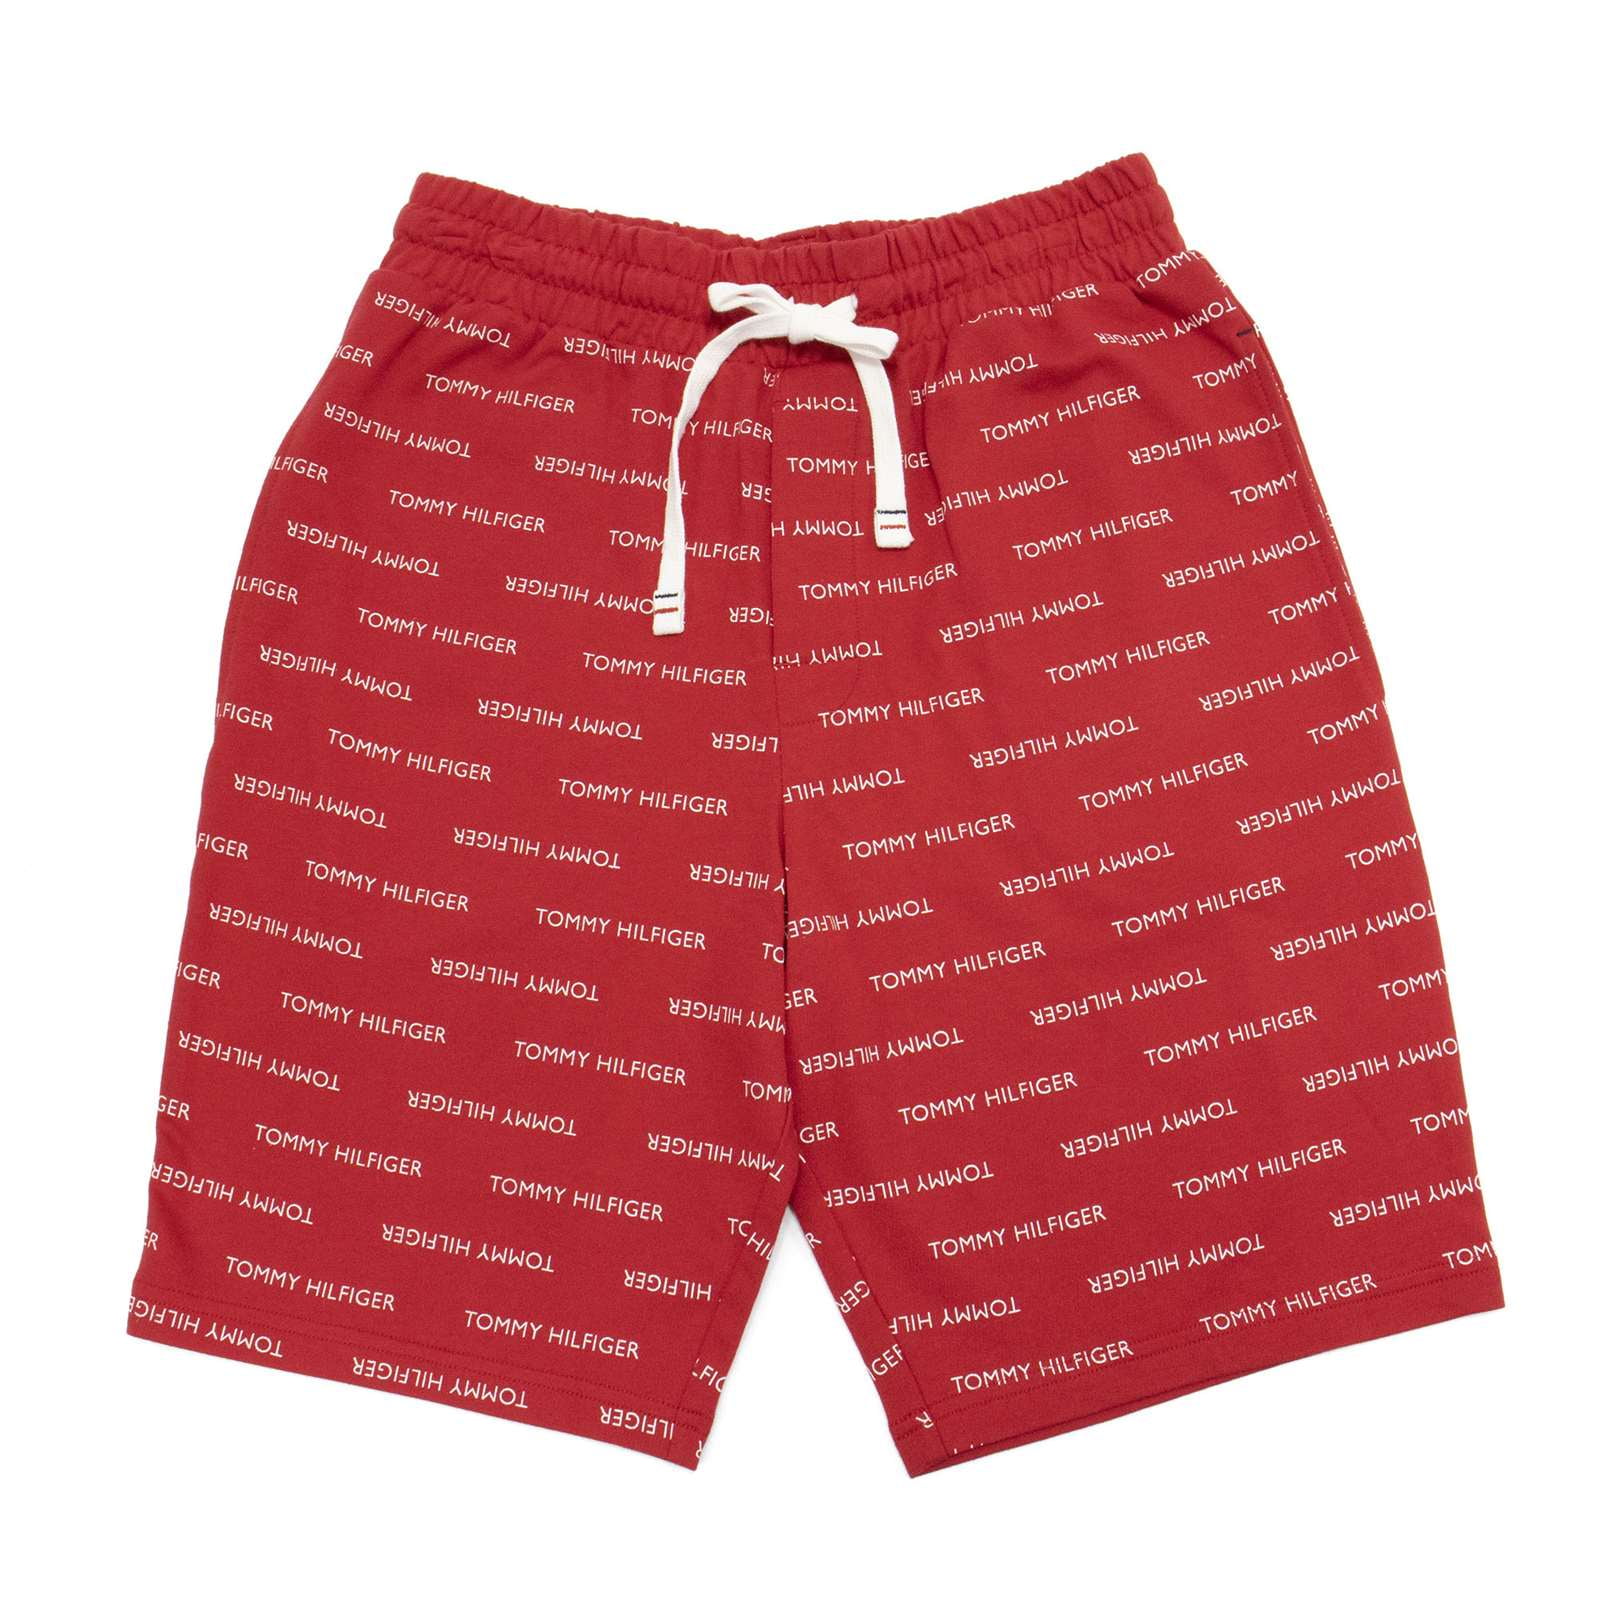 BRAND NEW Details about   Coca-Cola Board Shorts Gray and Red Size X-Large 